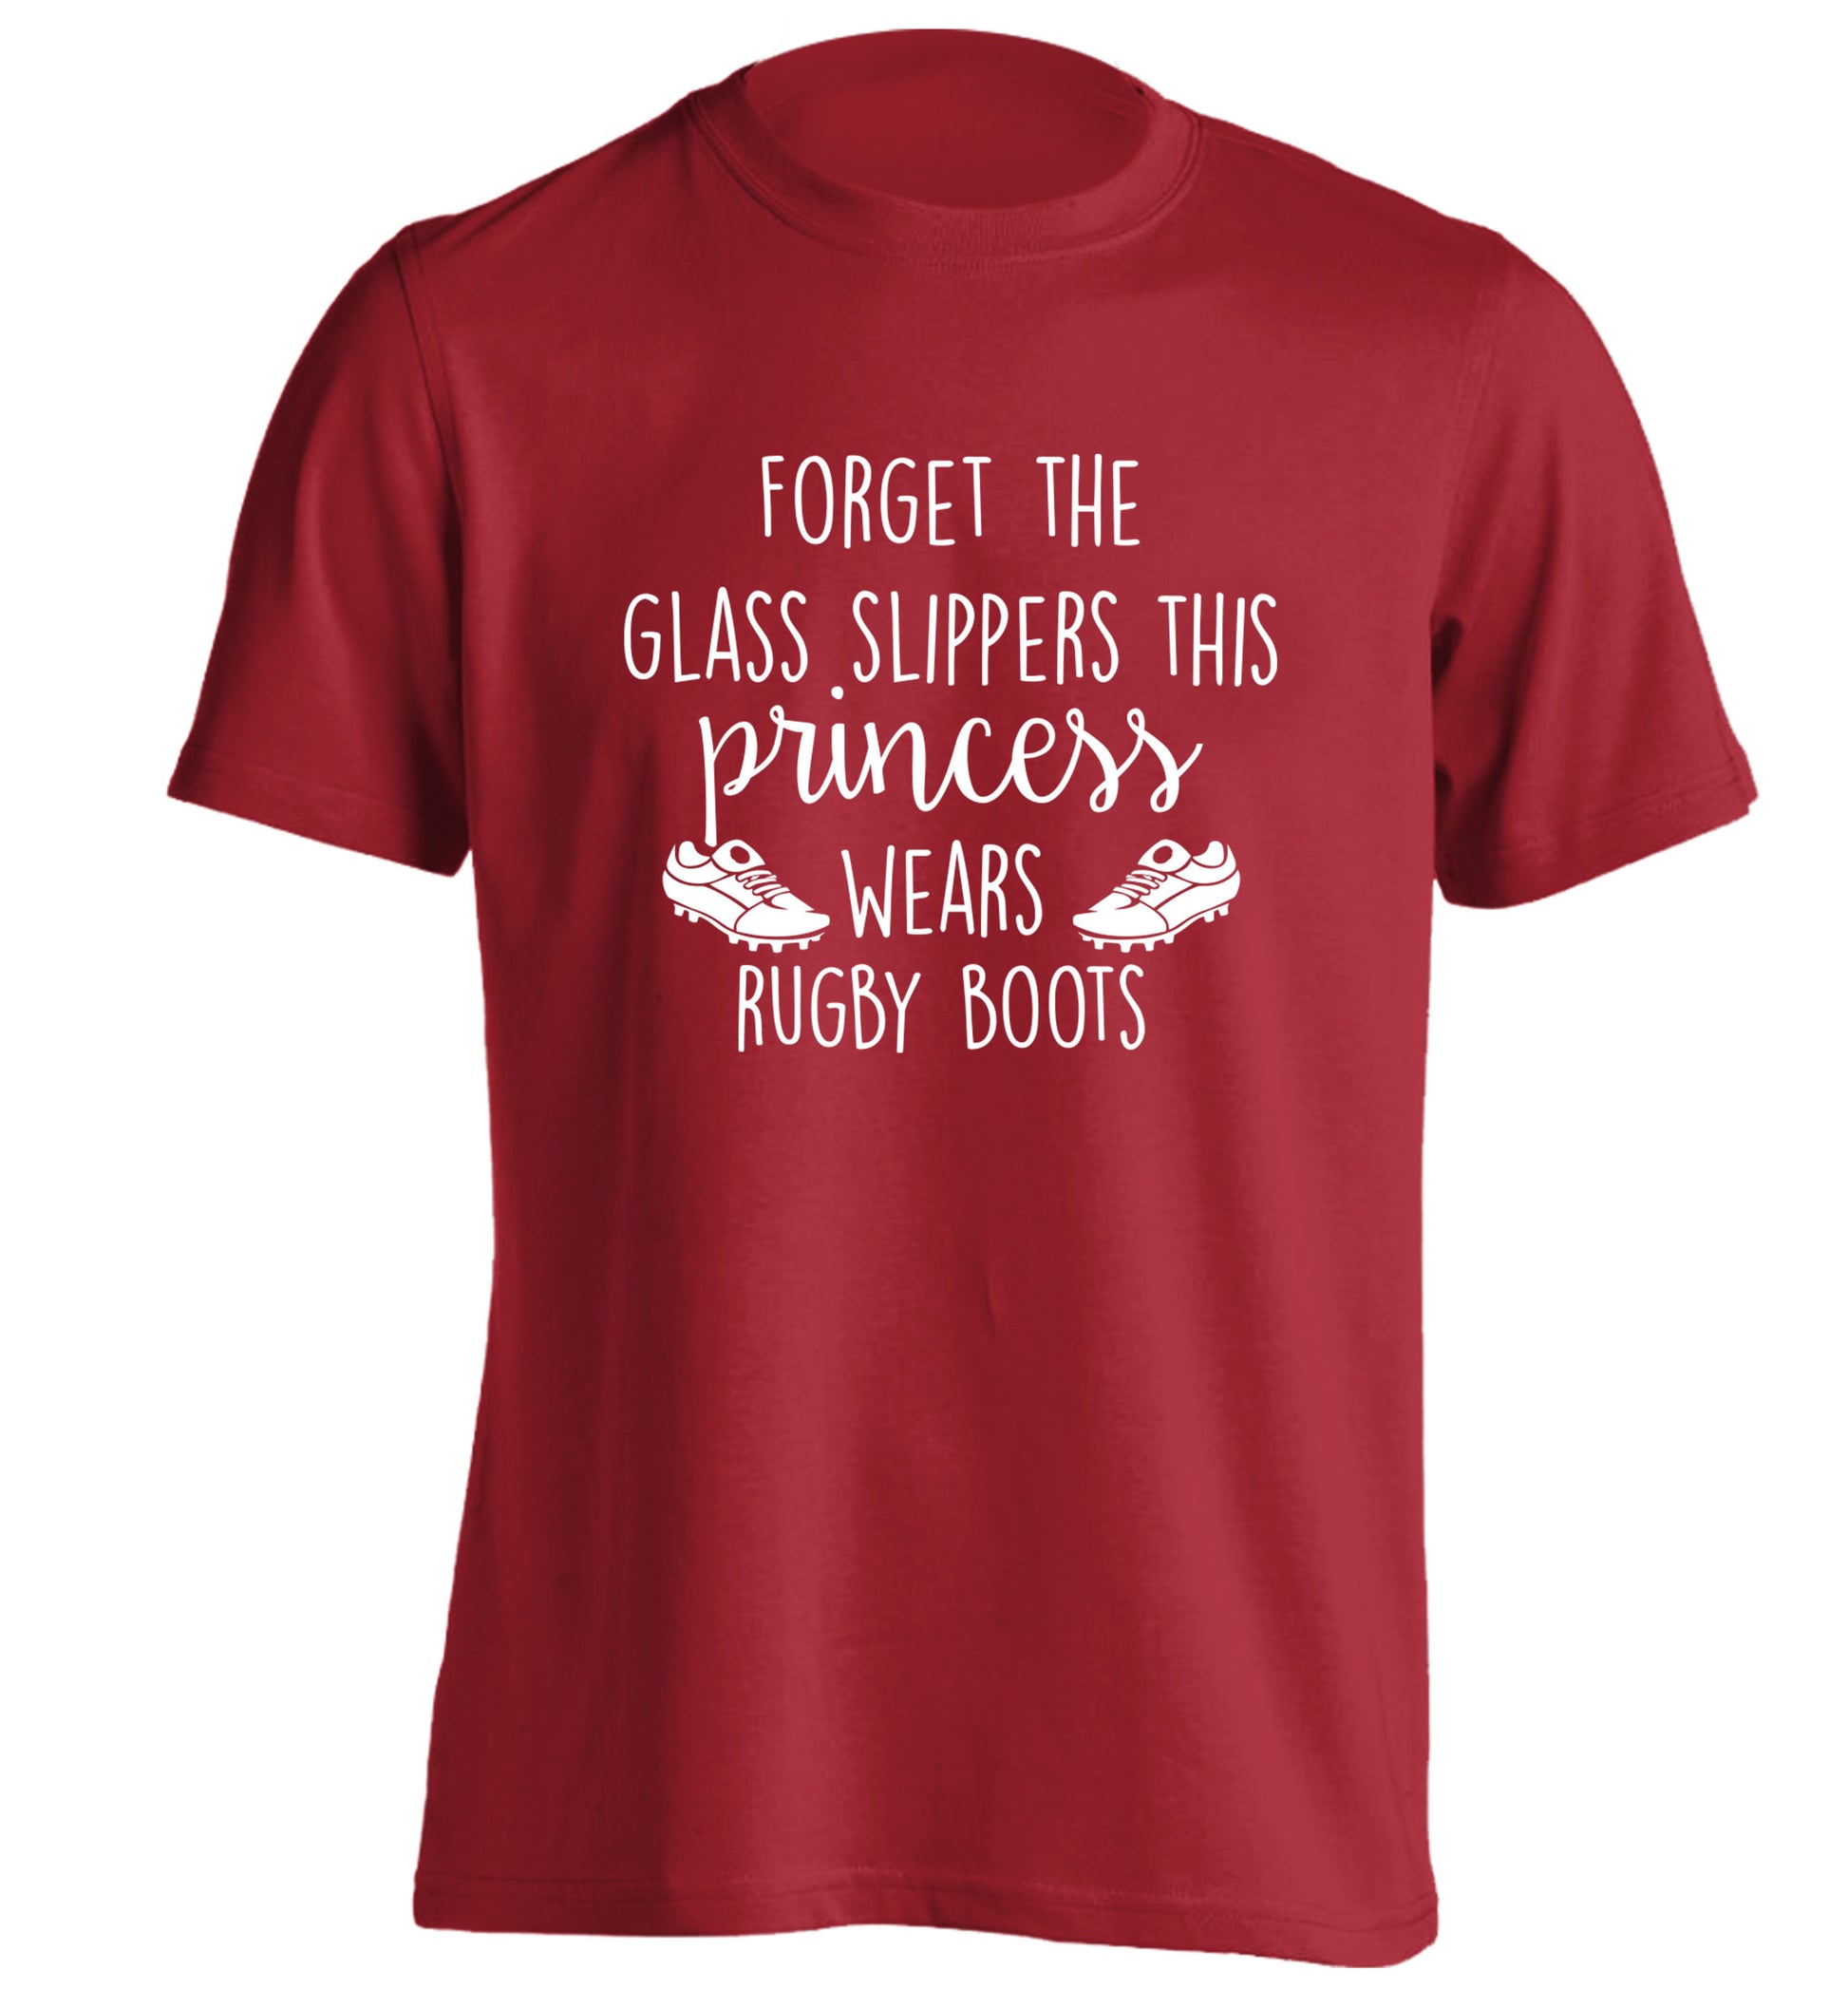 Forget the glass slippers this princess wears rugby boots adults unisex red Tshirt 2XL